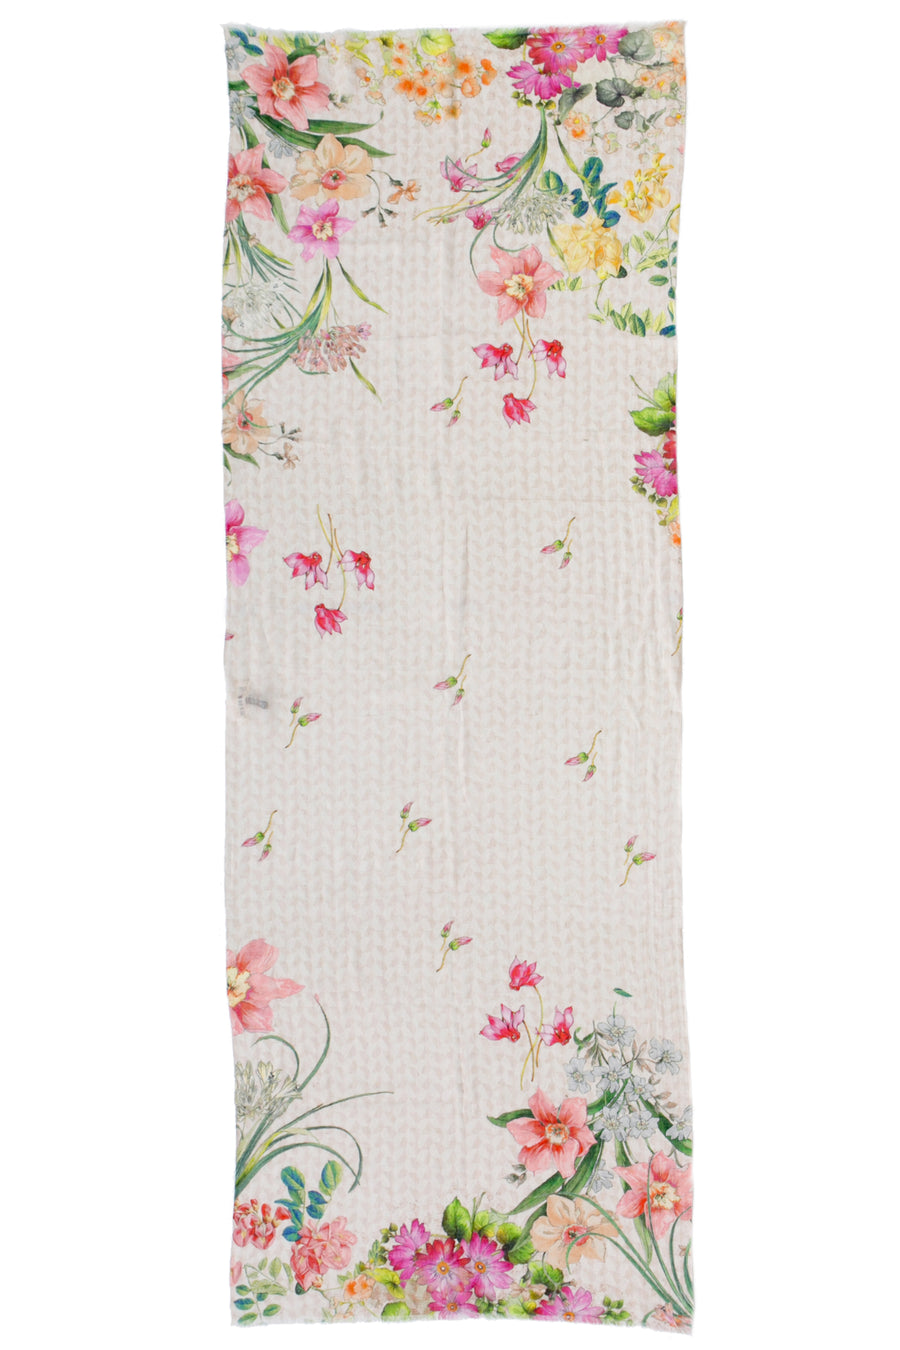 CHIE IMAI Scarf Collection - Floral Delight